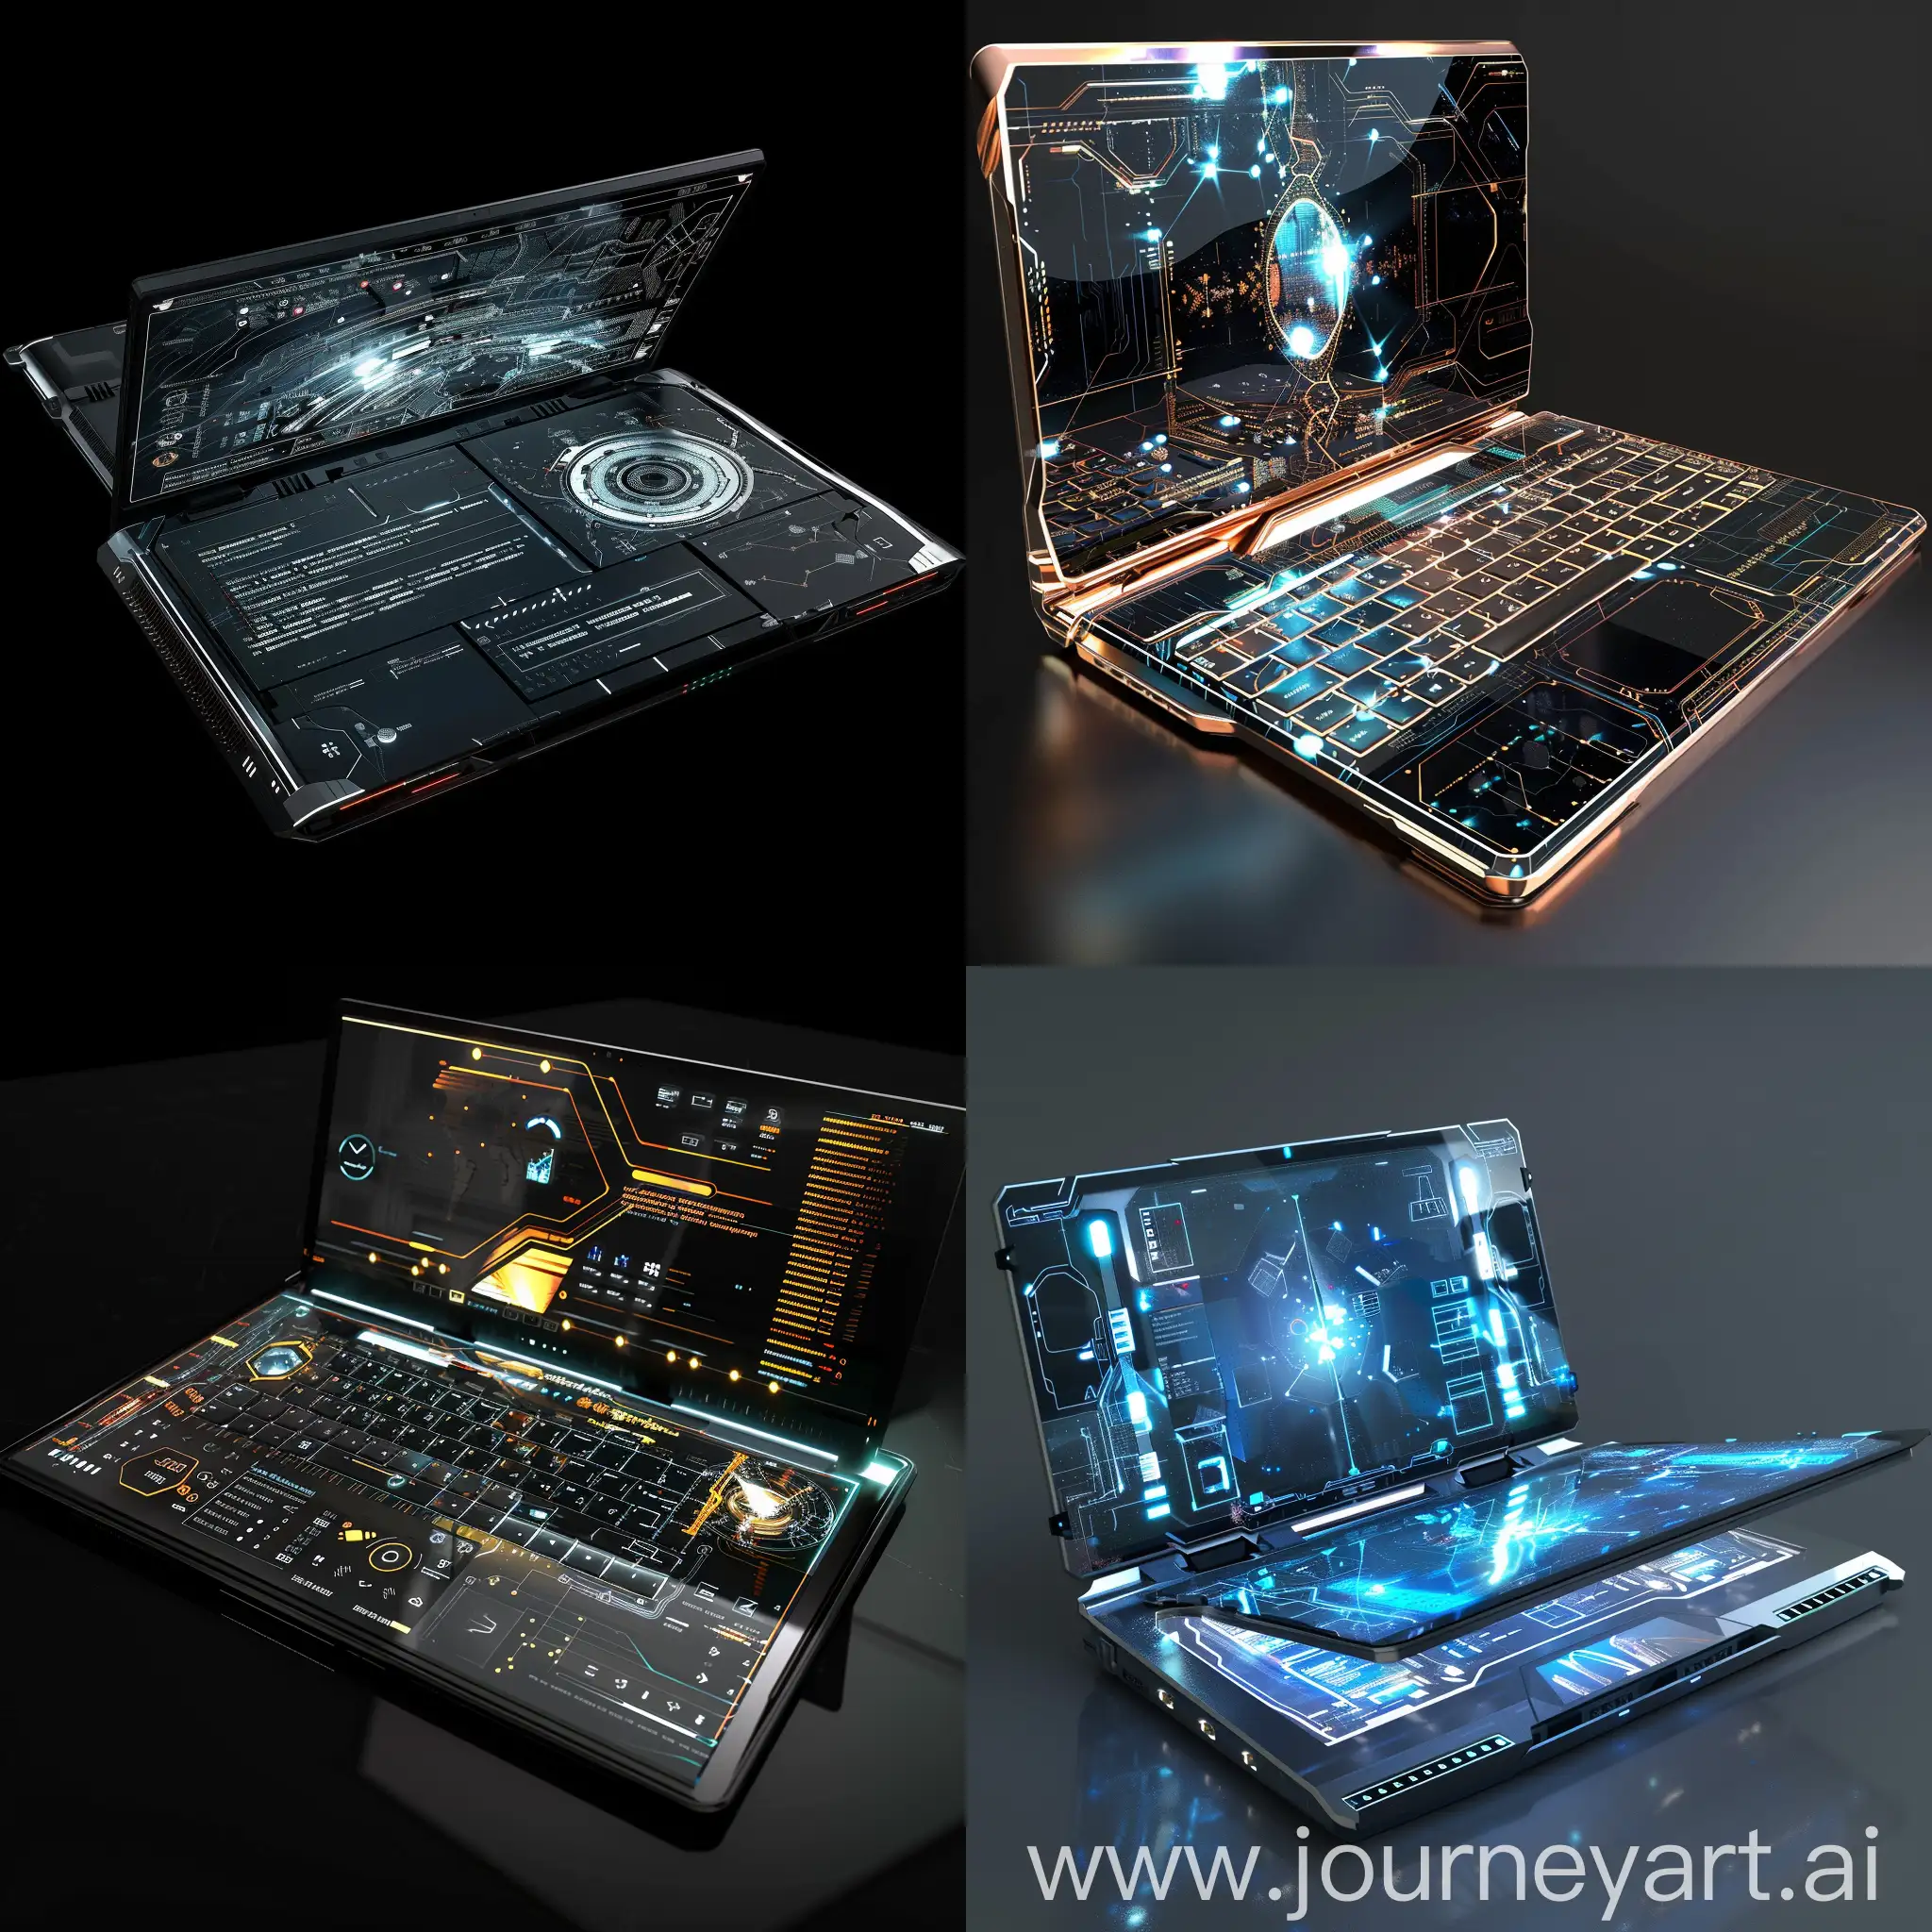 Futuristic-SciFi-Laptop-with-Quantumdot-Display-and-Holographic-Interfaces